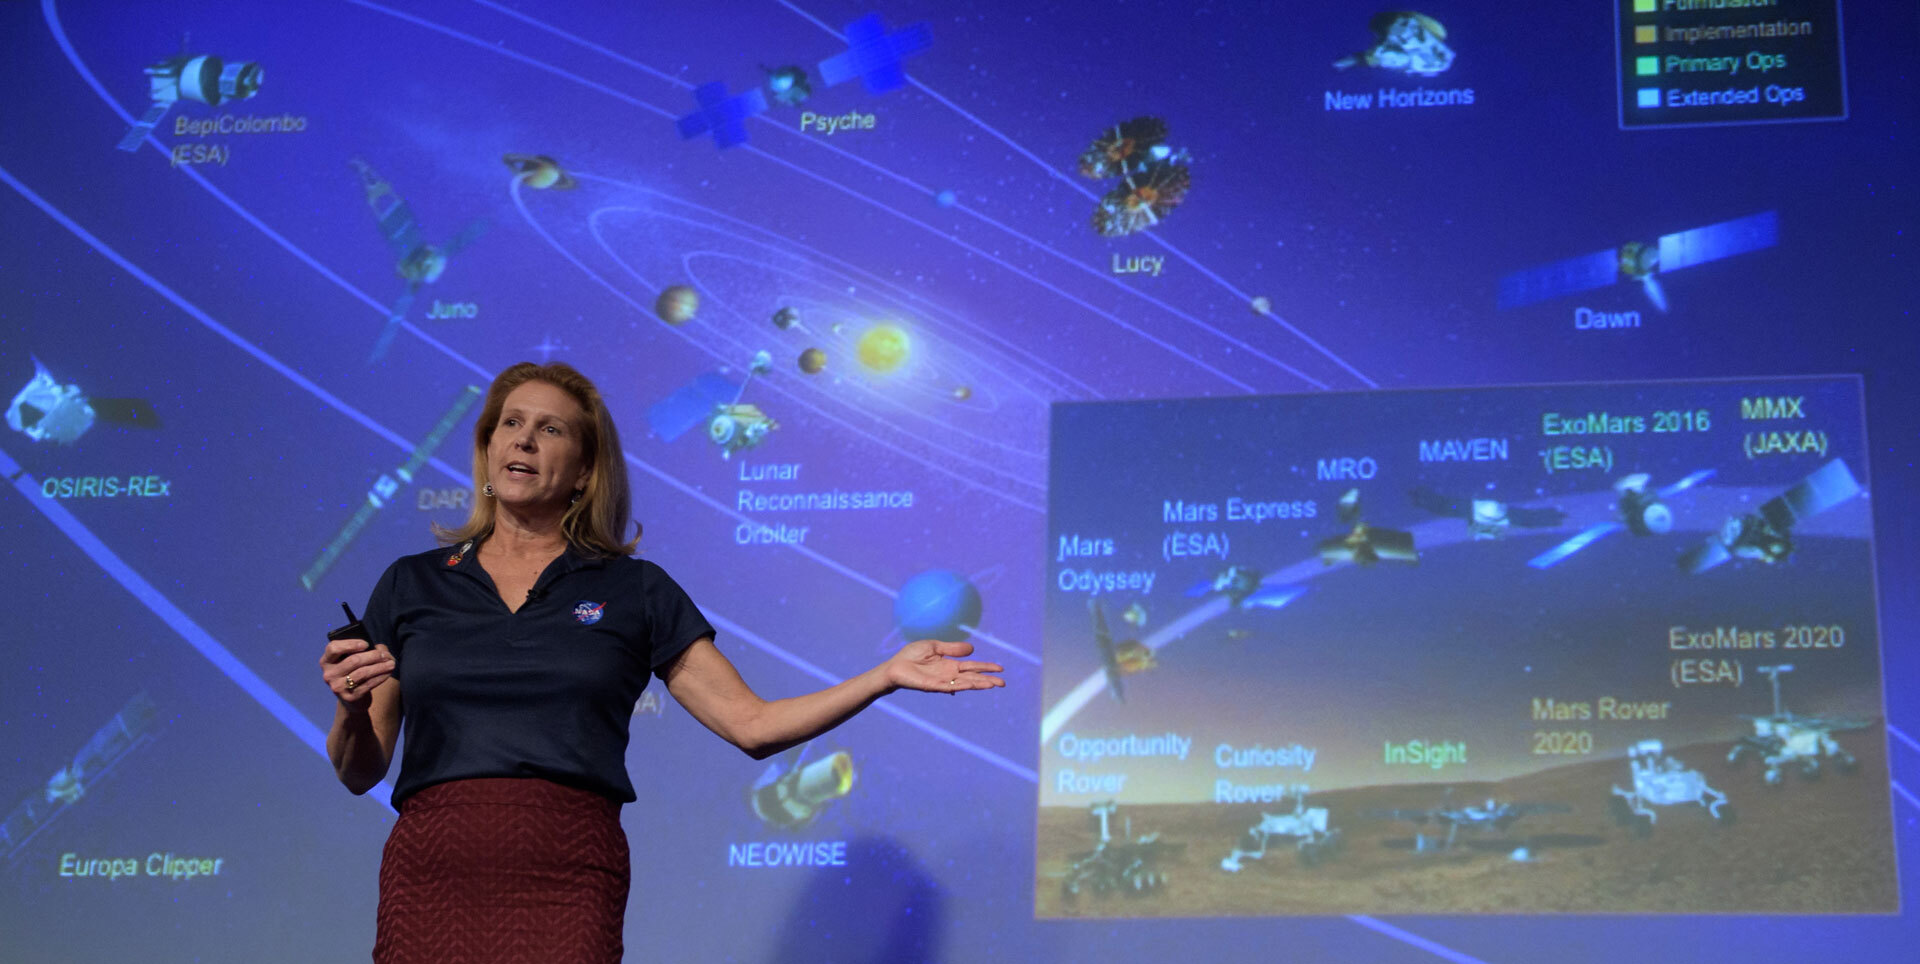 Lori Glaze in front of a giant screen showing all NASA space missions.